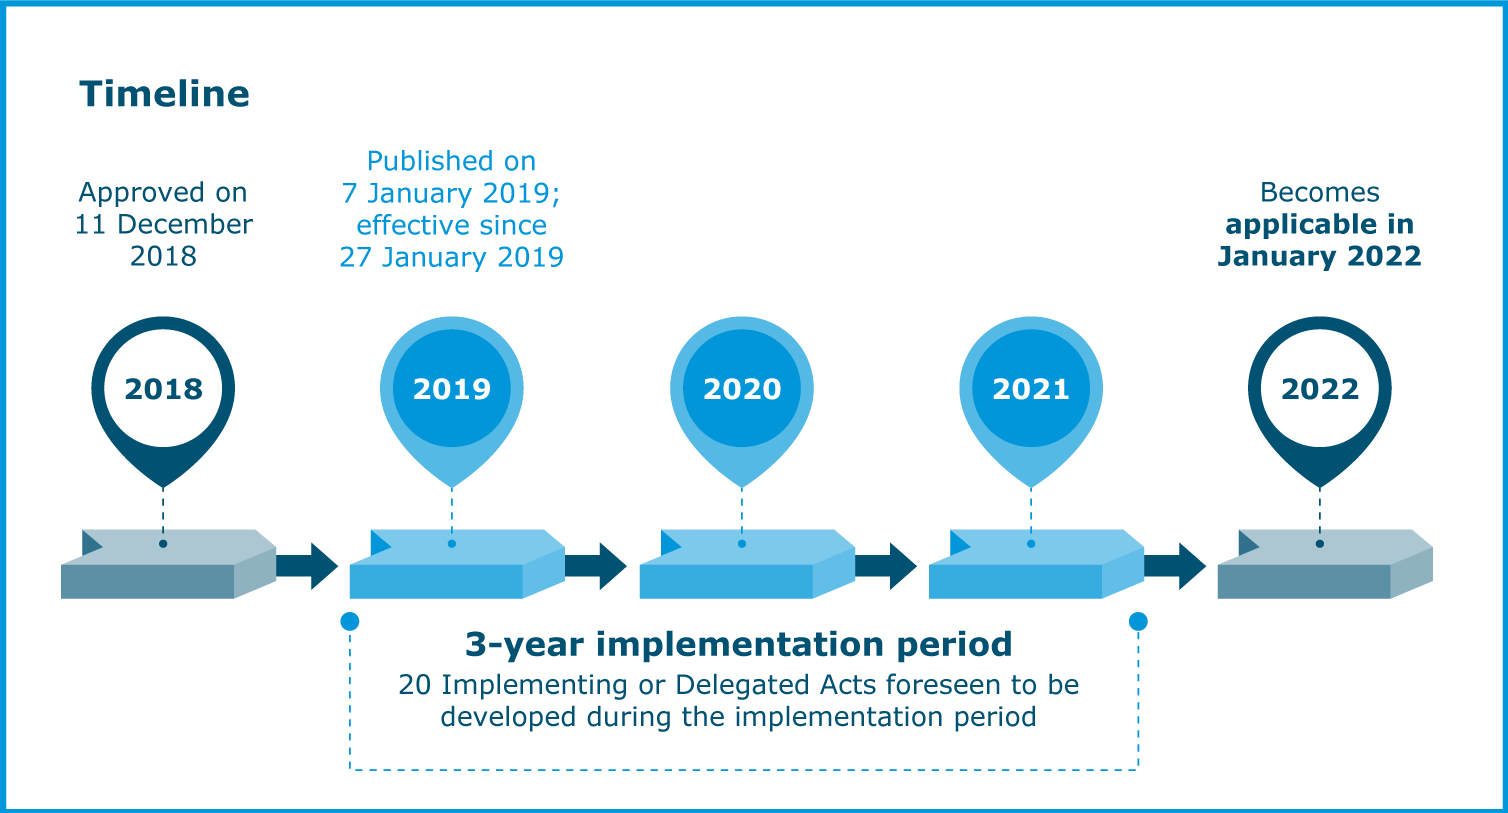 Timeline of the 3-year implementation period